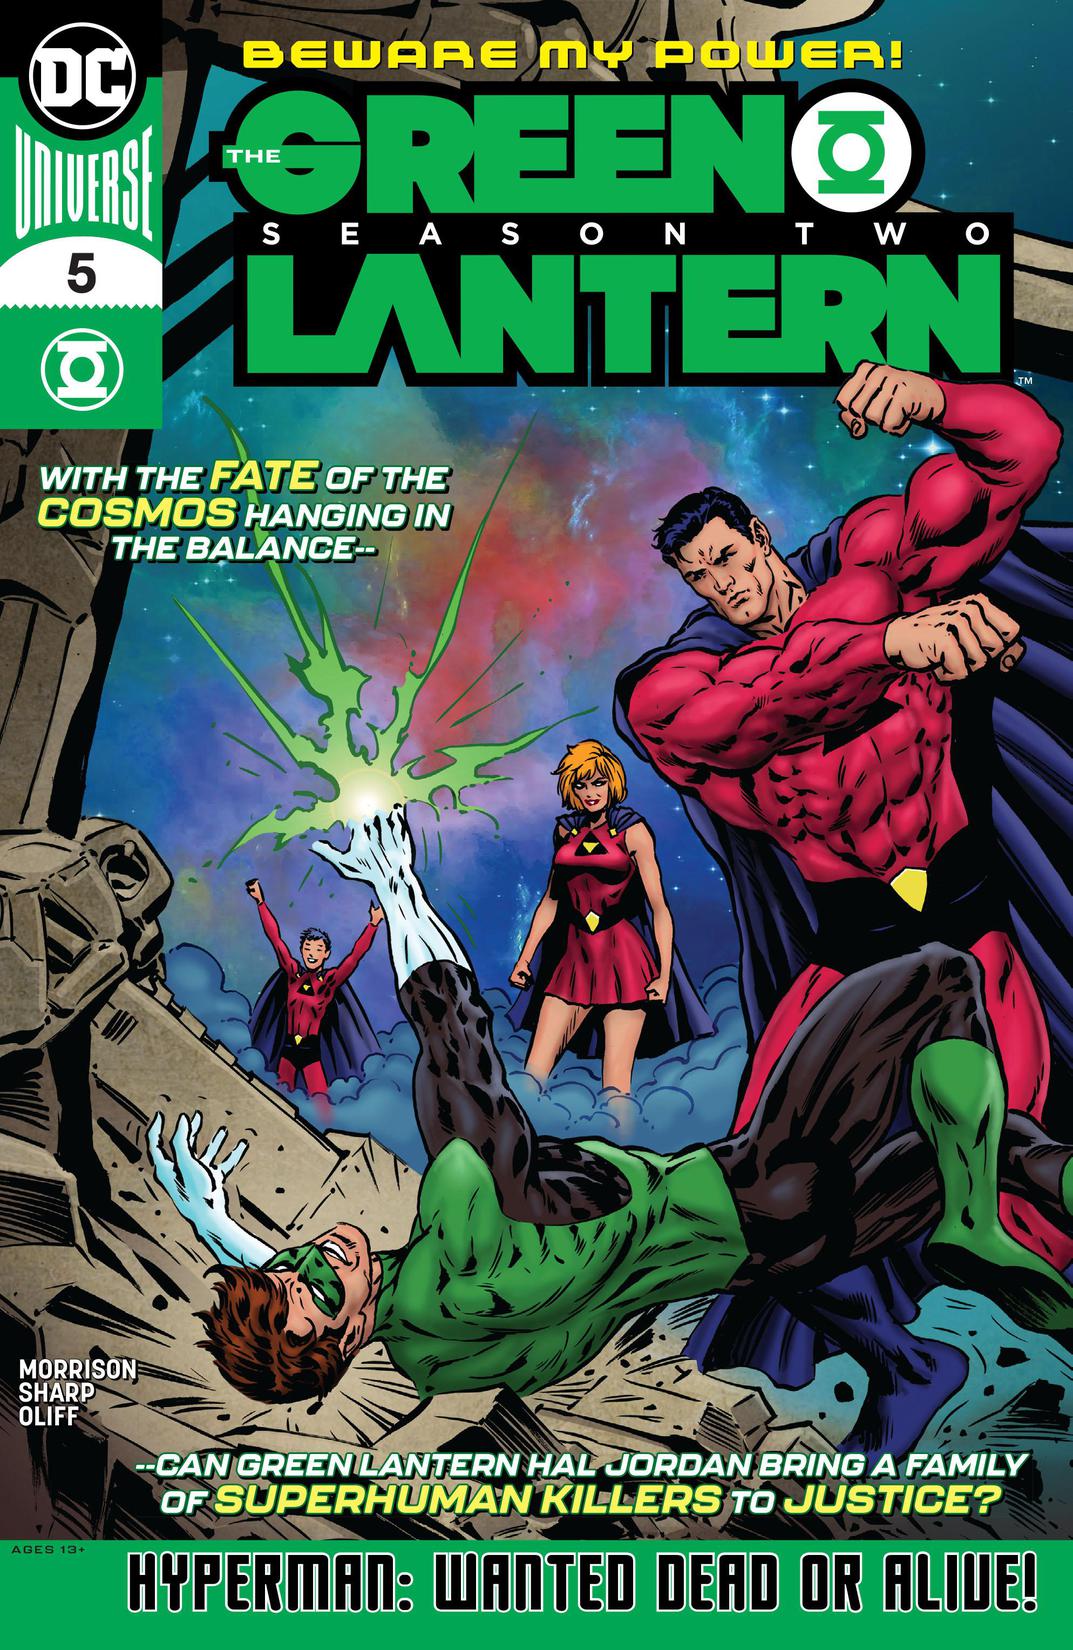 The Green Lantern Season Two #5 preview images